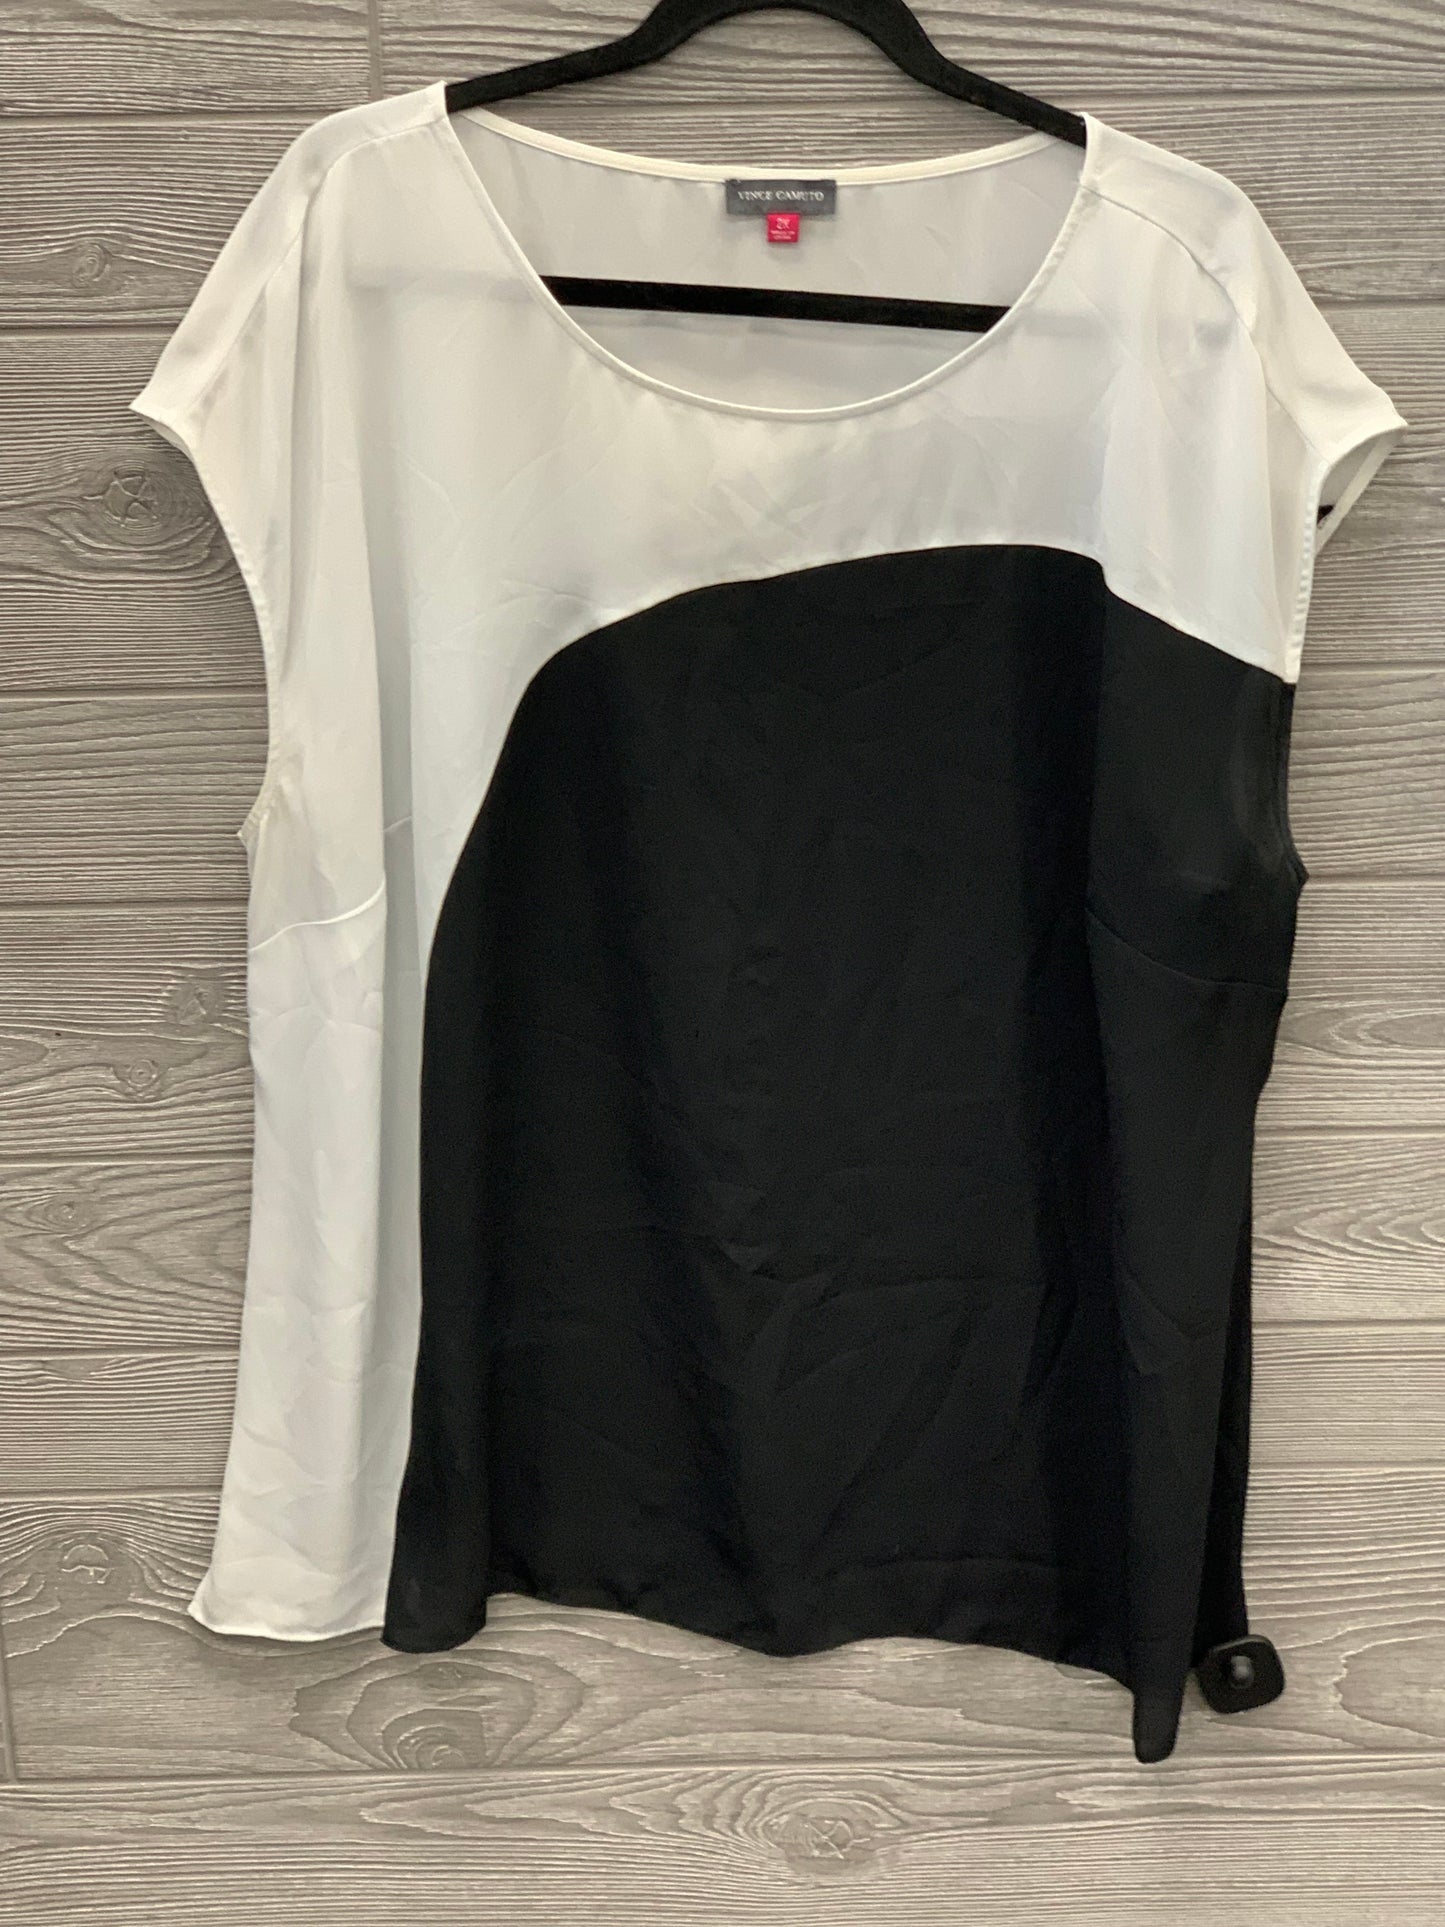 Black & White Top Short Sleeve Vince Camuto, Size 2x